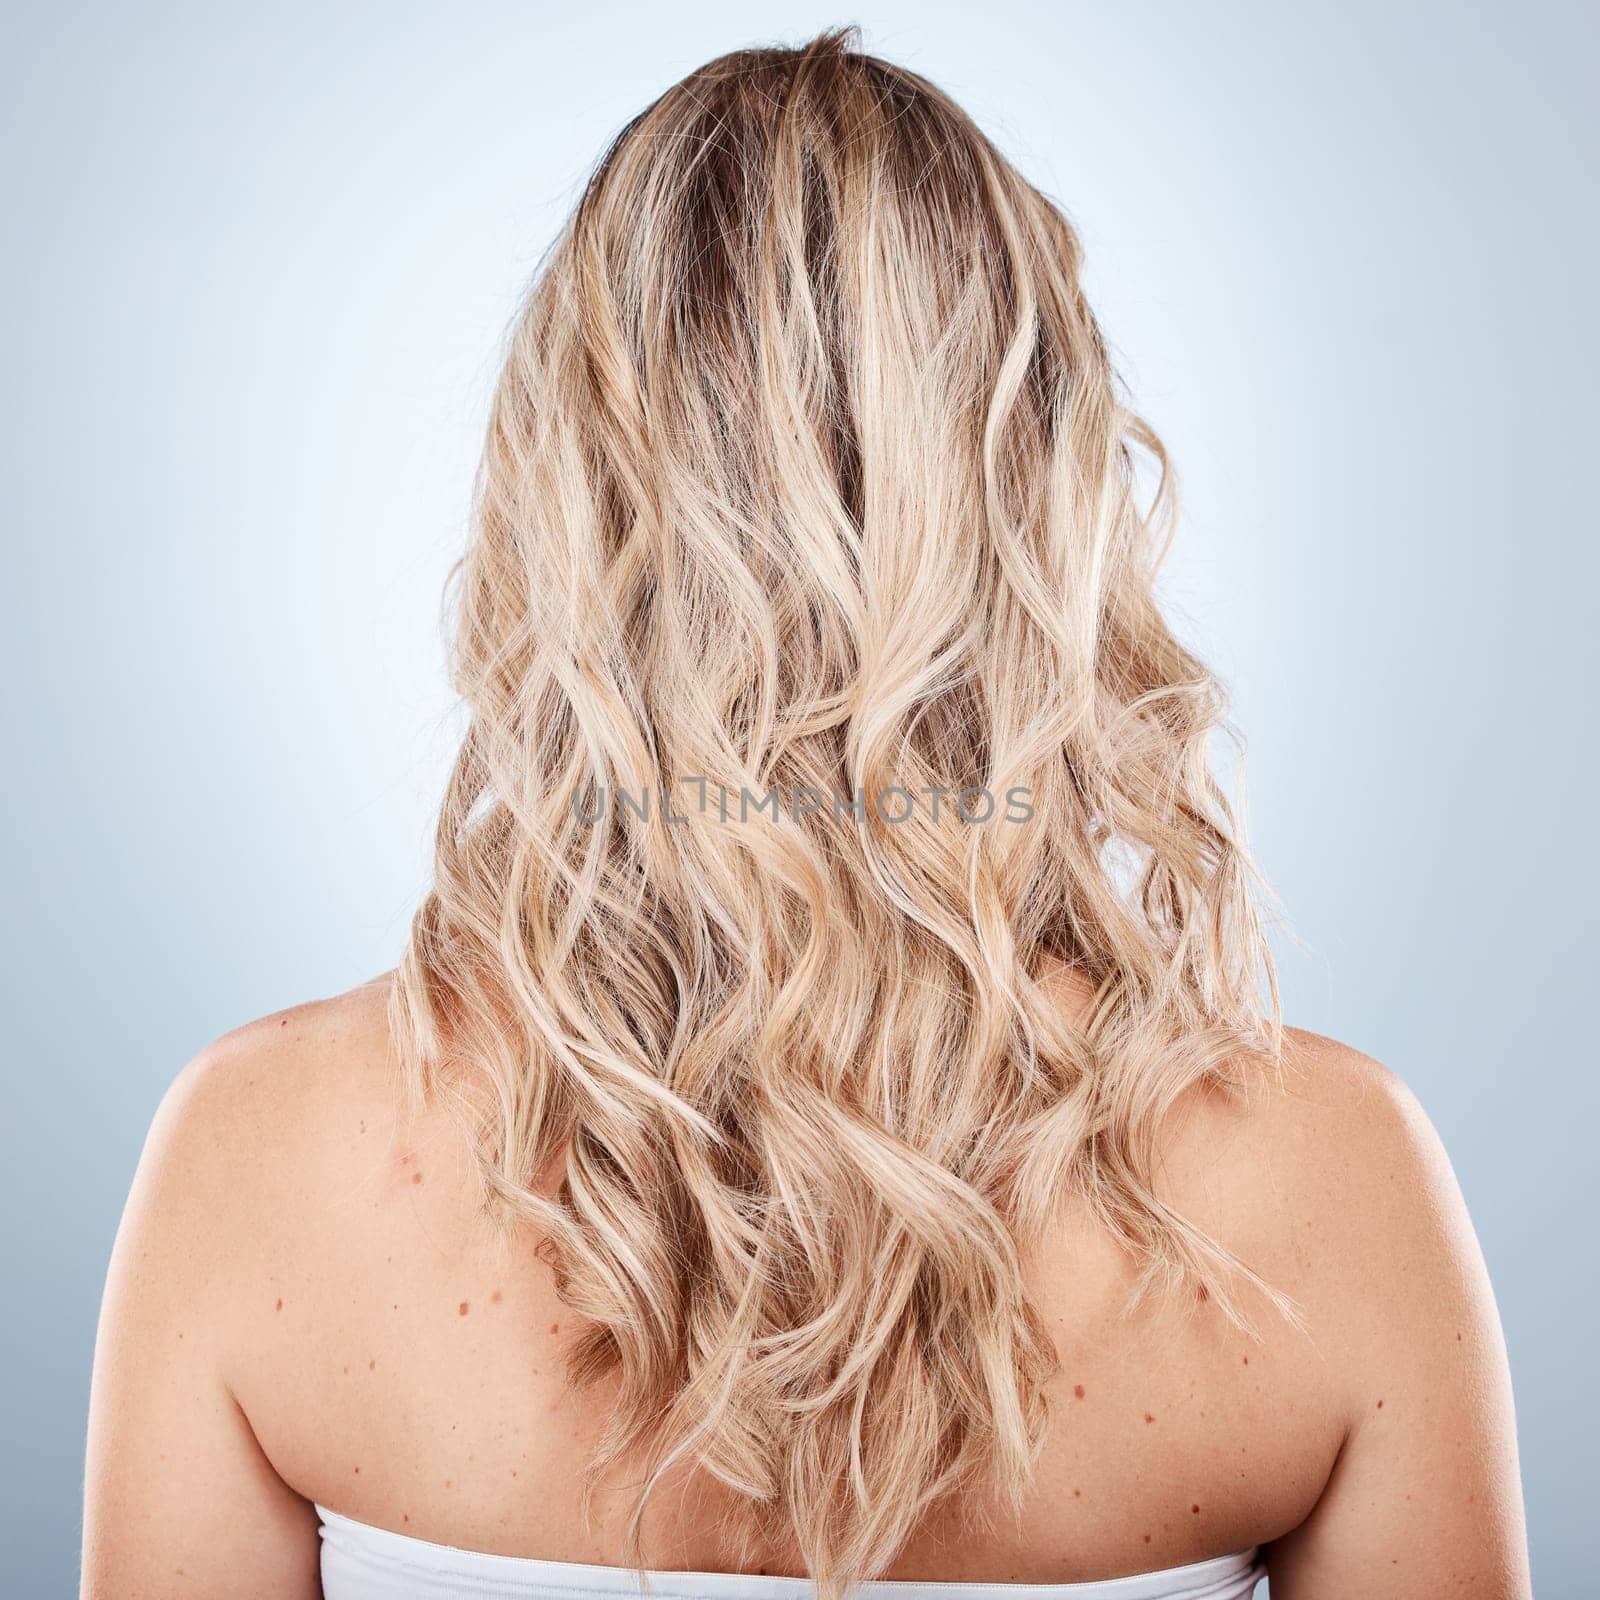 Hair care, beauty and back of woman in studio on a gray background. Balayage, hairstyle and female model with long, blonde and healthy hair after salon or cosmetics hair treatment for hair texture